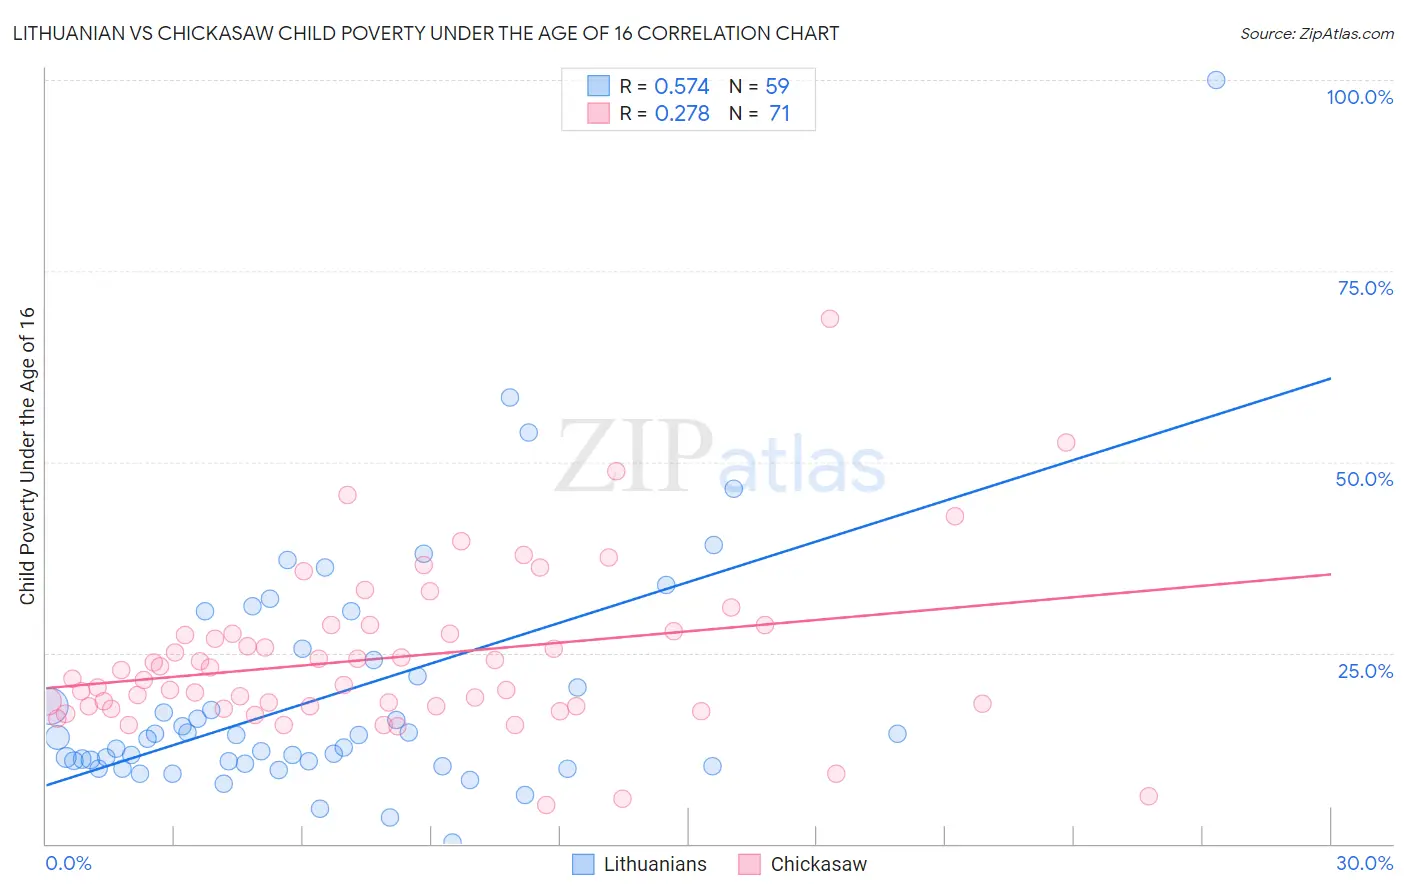 Lithuanian vs Chickasaw Child Poverty Under the Age of 16